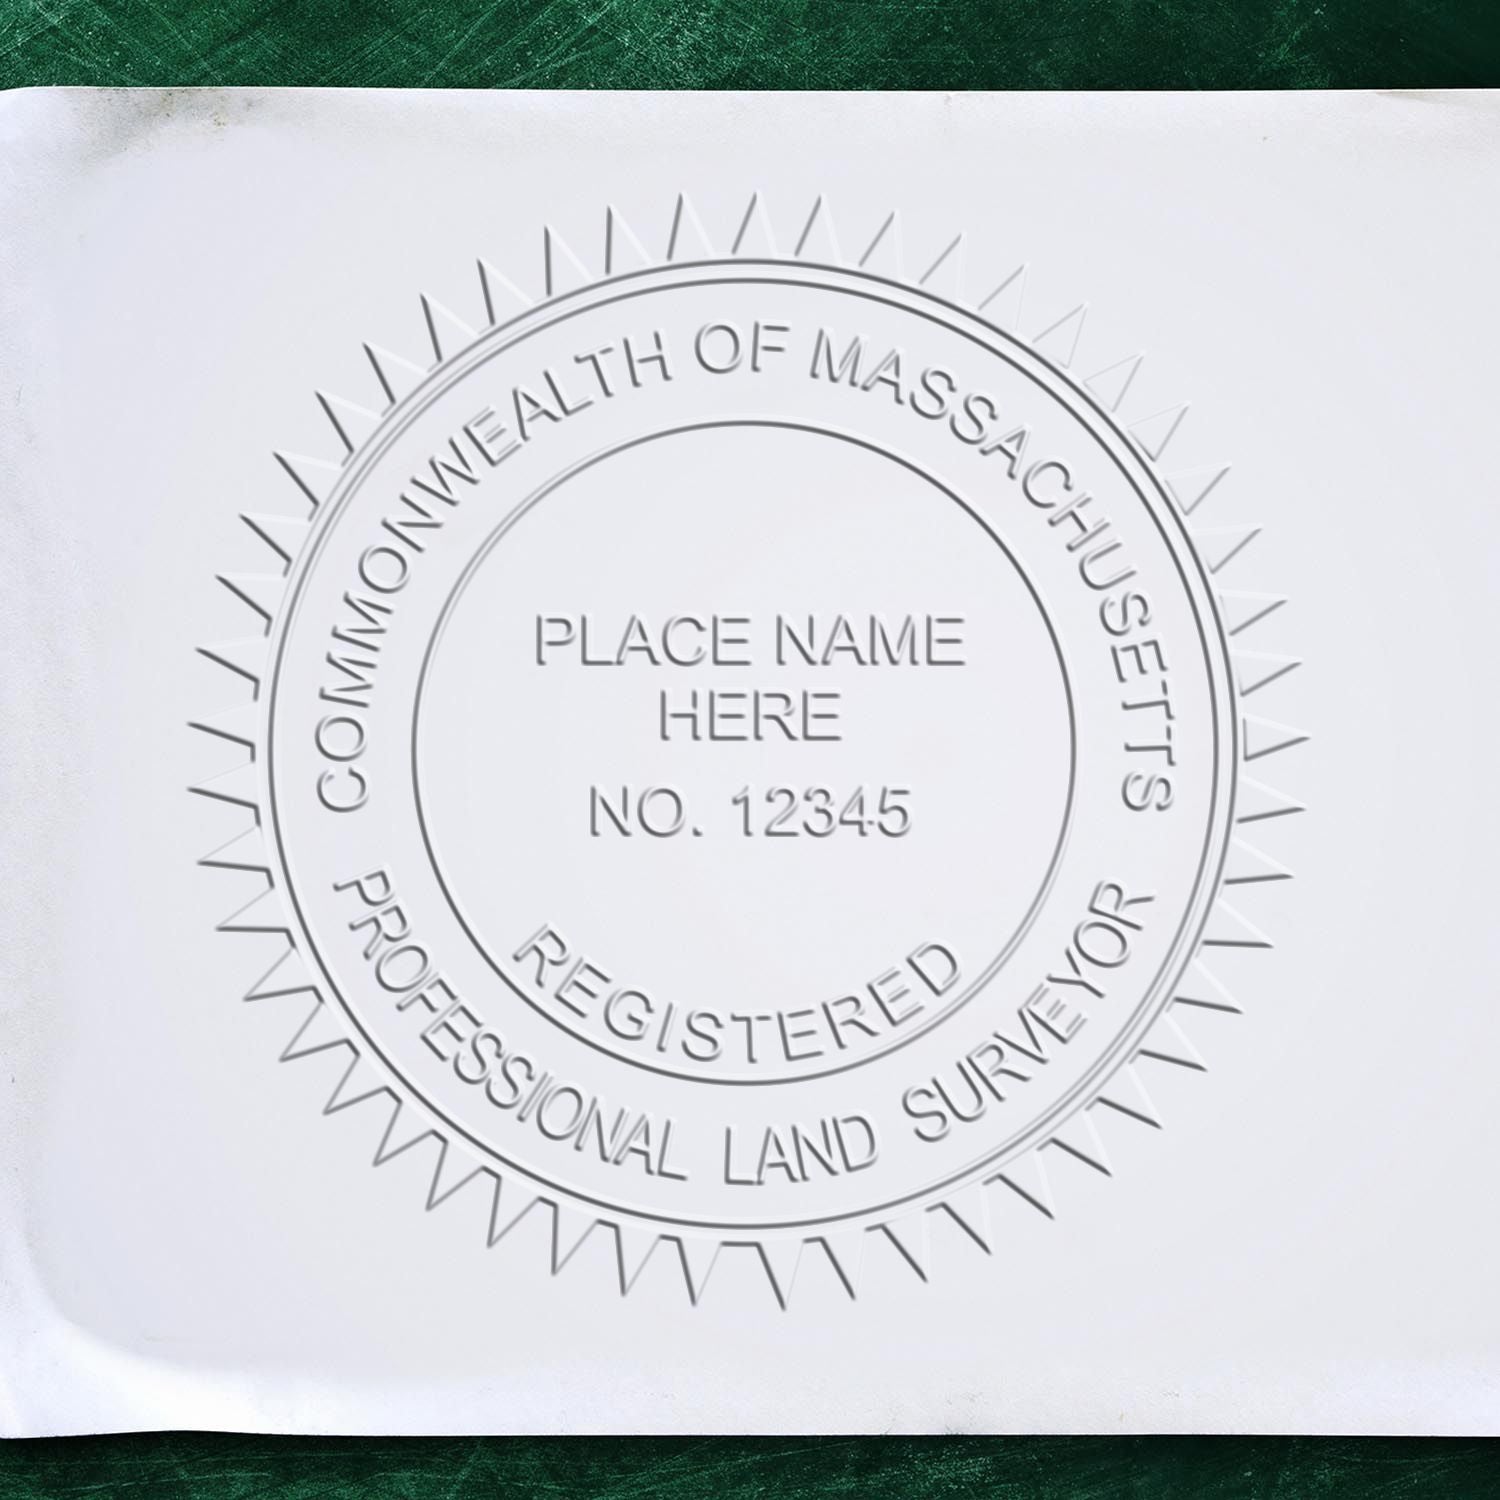 The main image for the Handheld Massachusetts Land Surveyor Seal depicting a sample of the imprint and electronic files